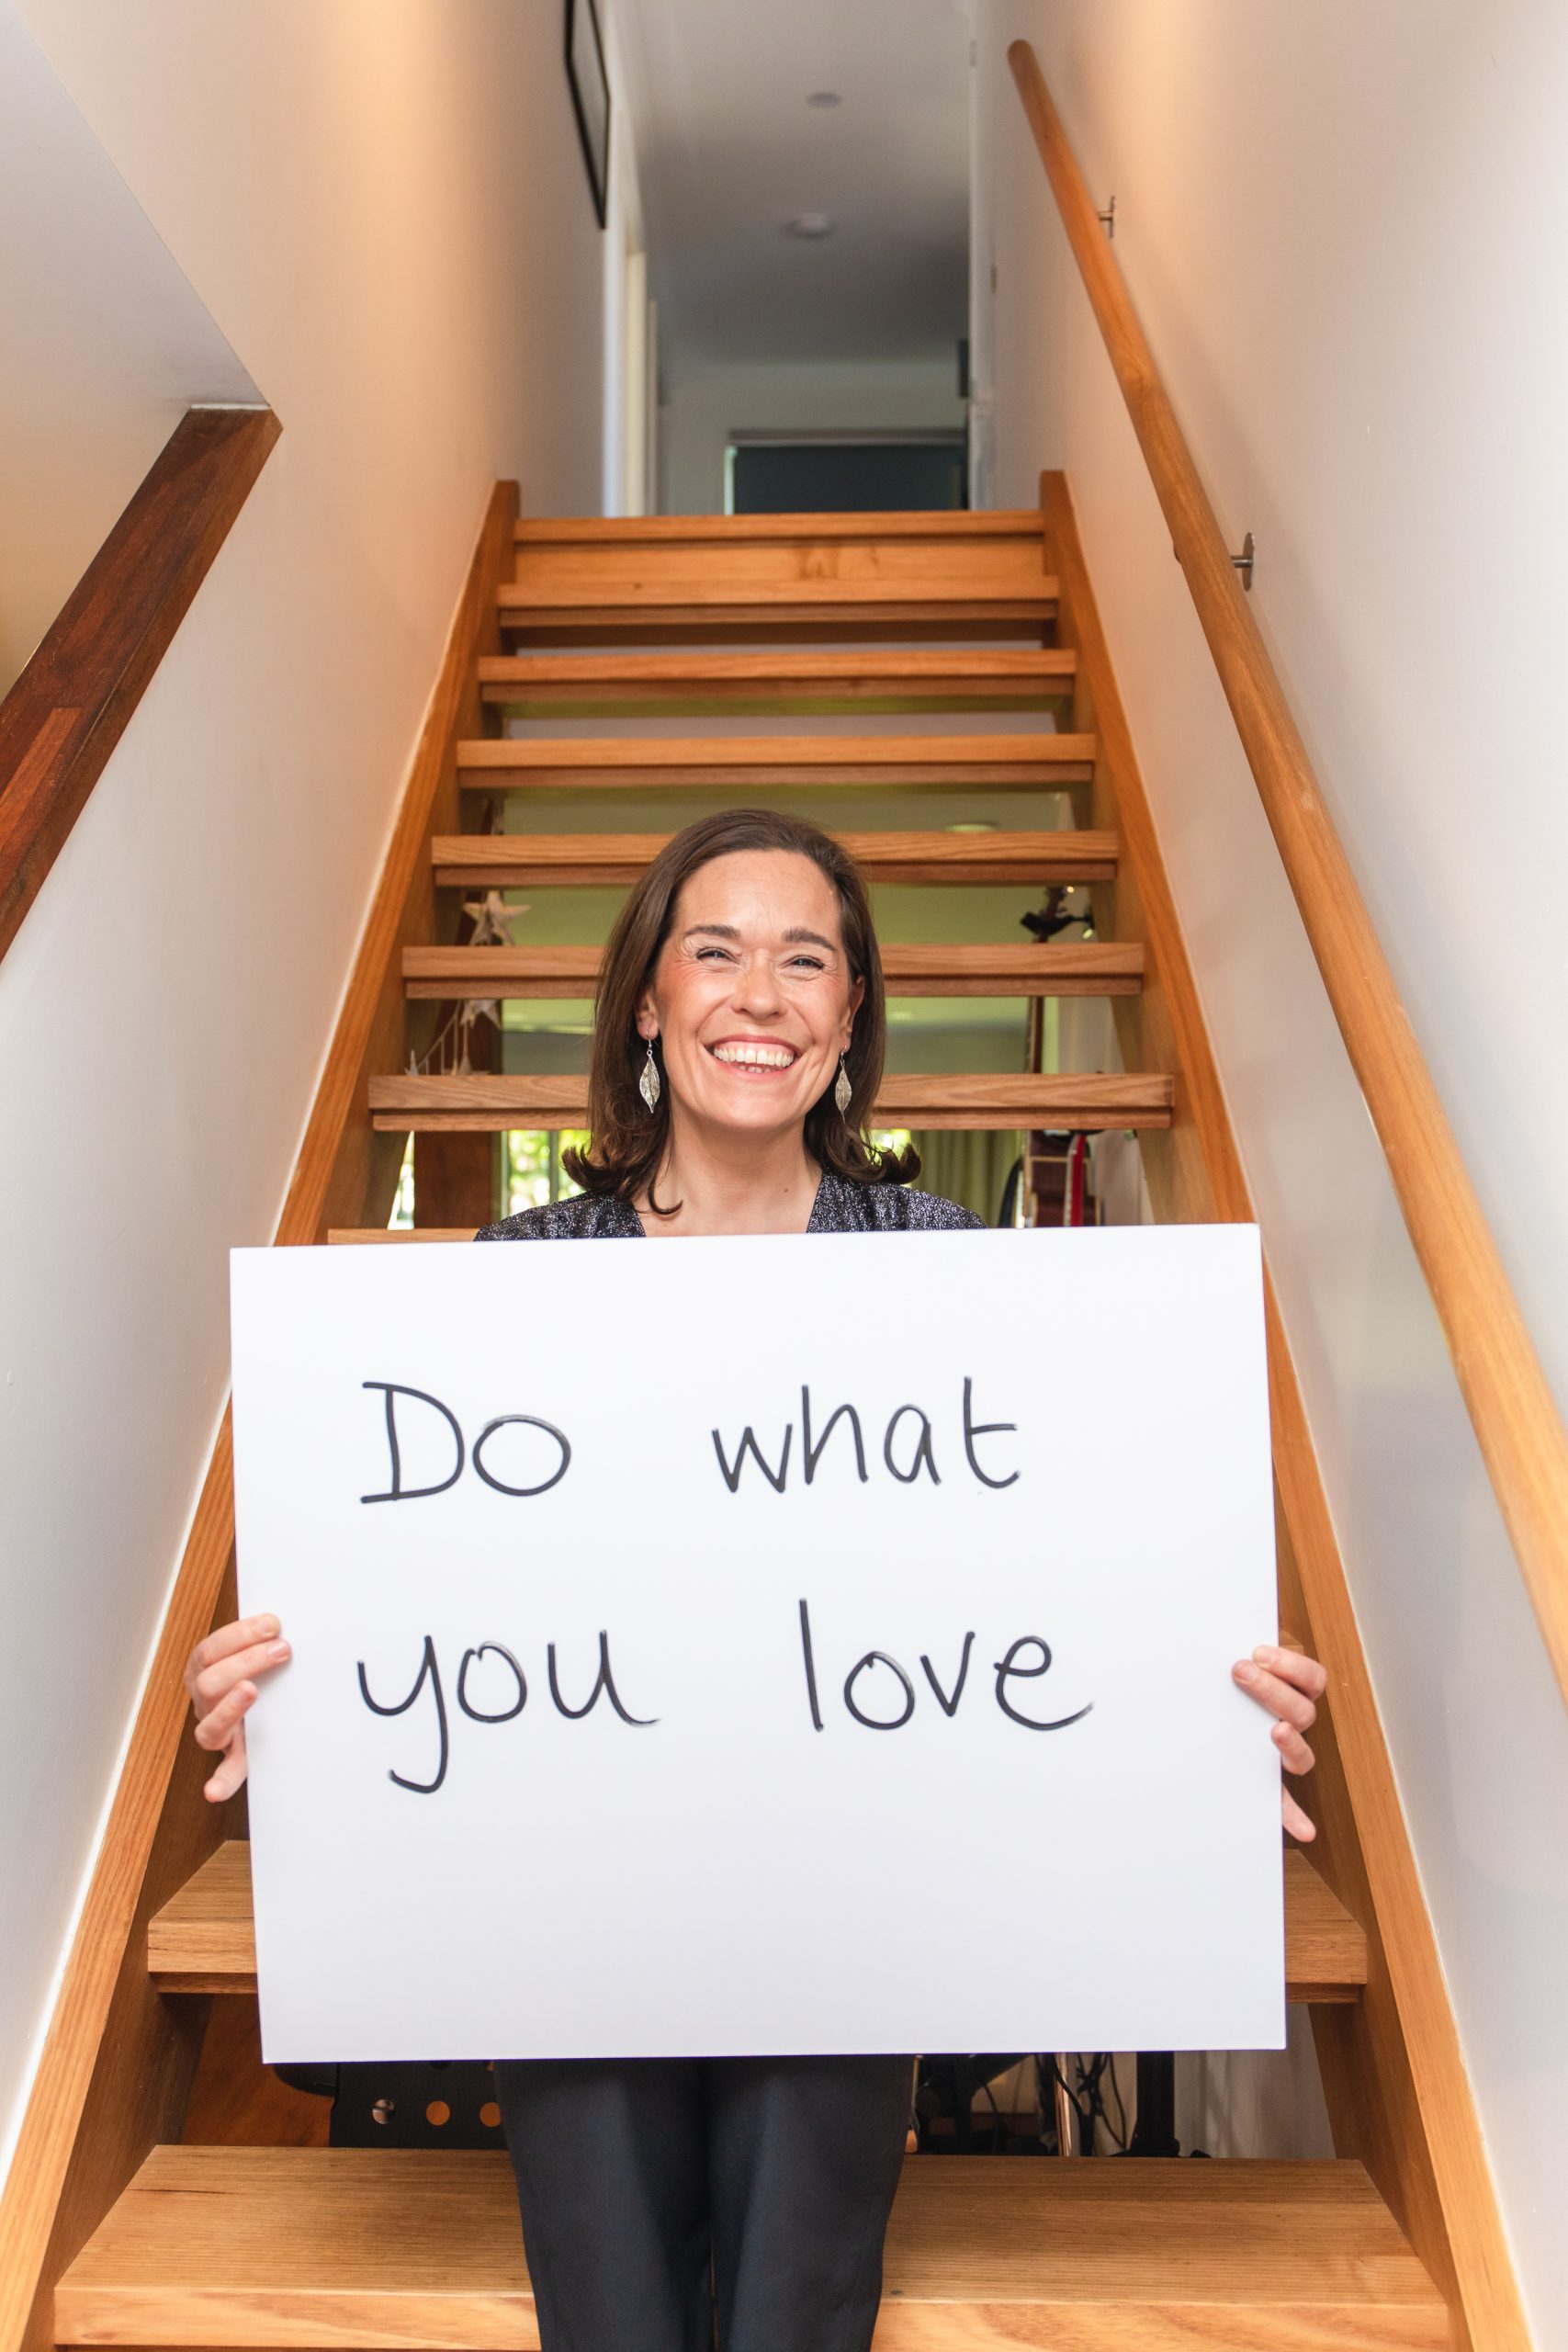 Em Hilder's biggest piece of advice - do what you love.